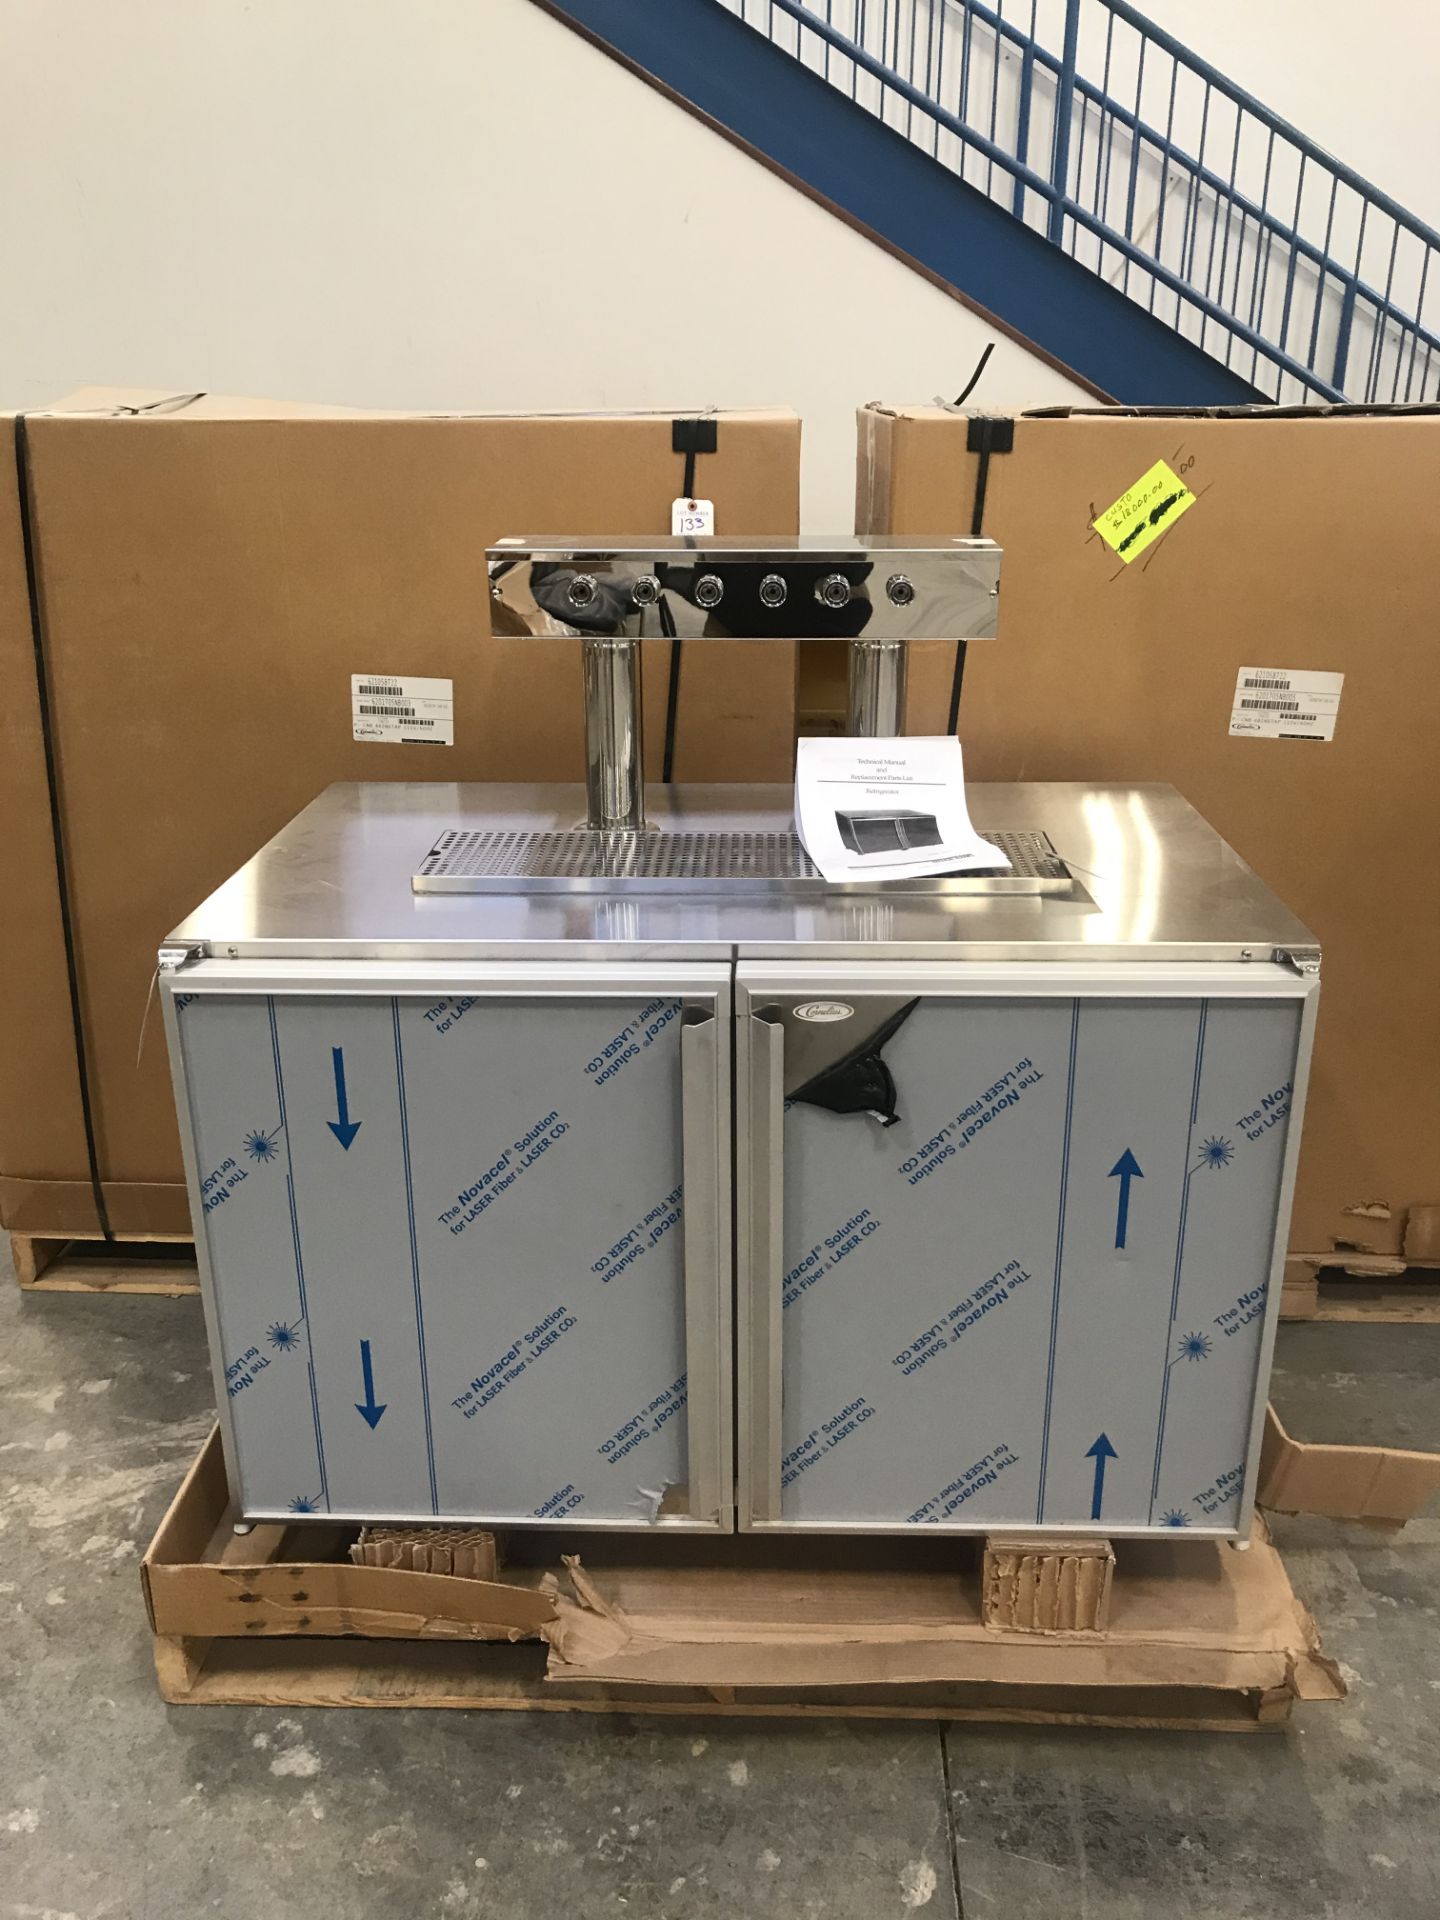 NEW IN BOX ON PALLET Silver King #SKR48/C2 Commercial Self-Contained Stainless Steel 6-Tap Cornelius